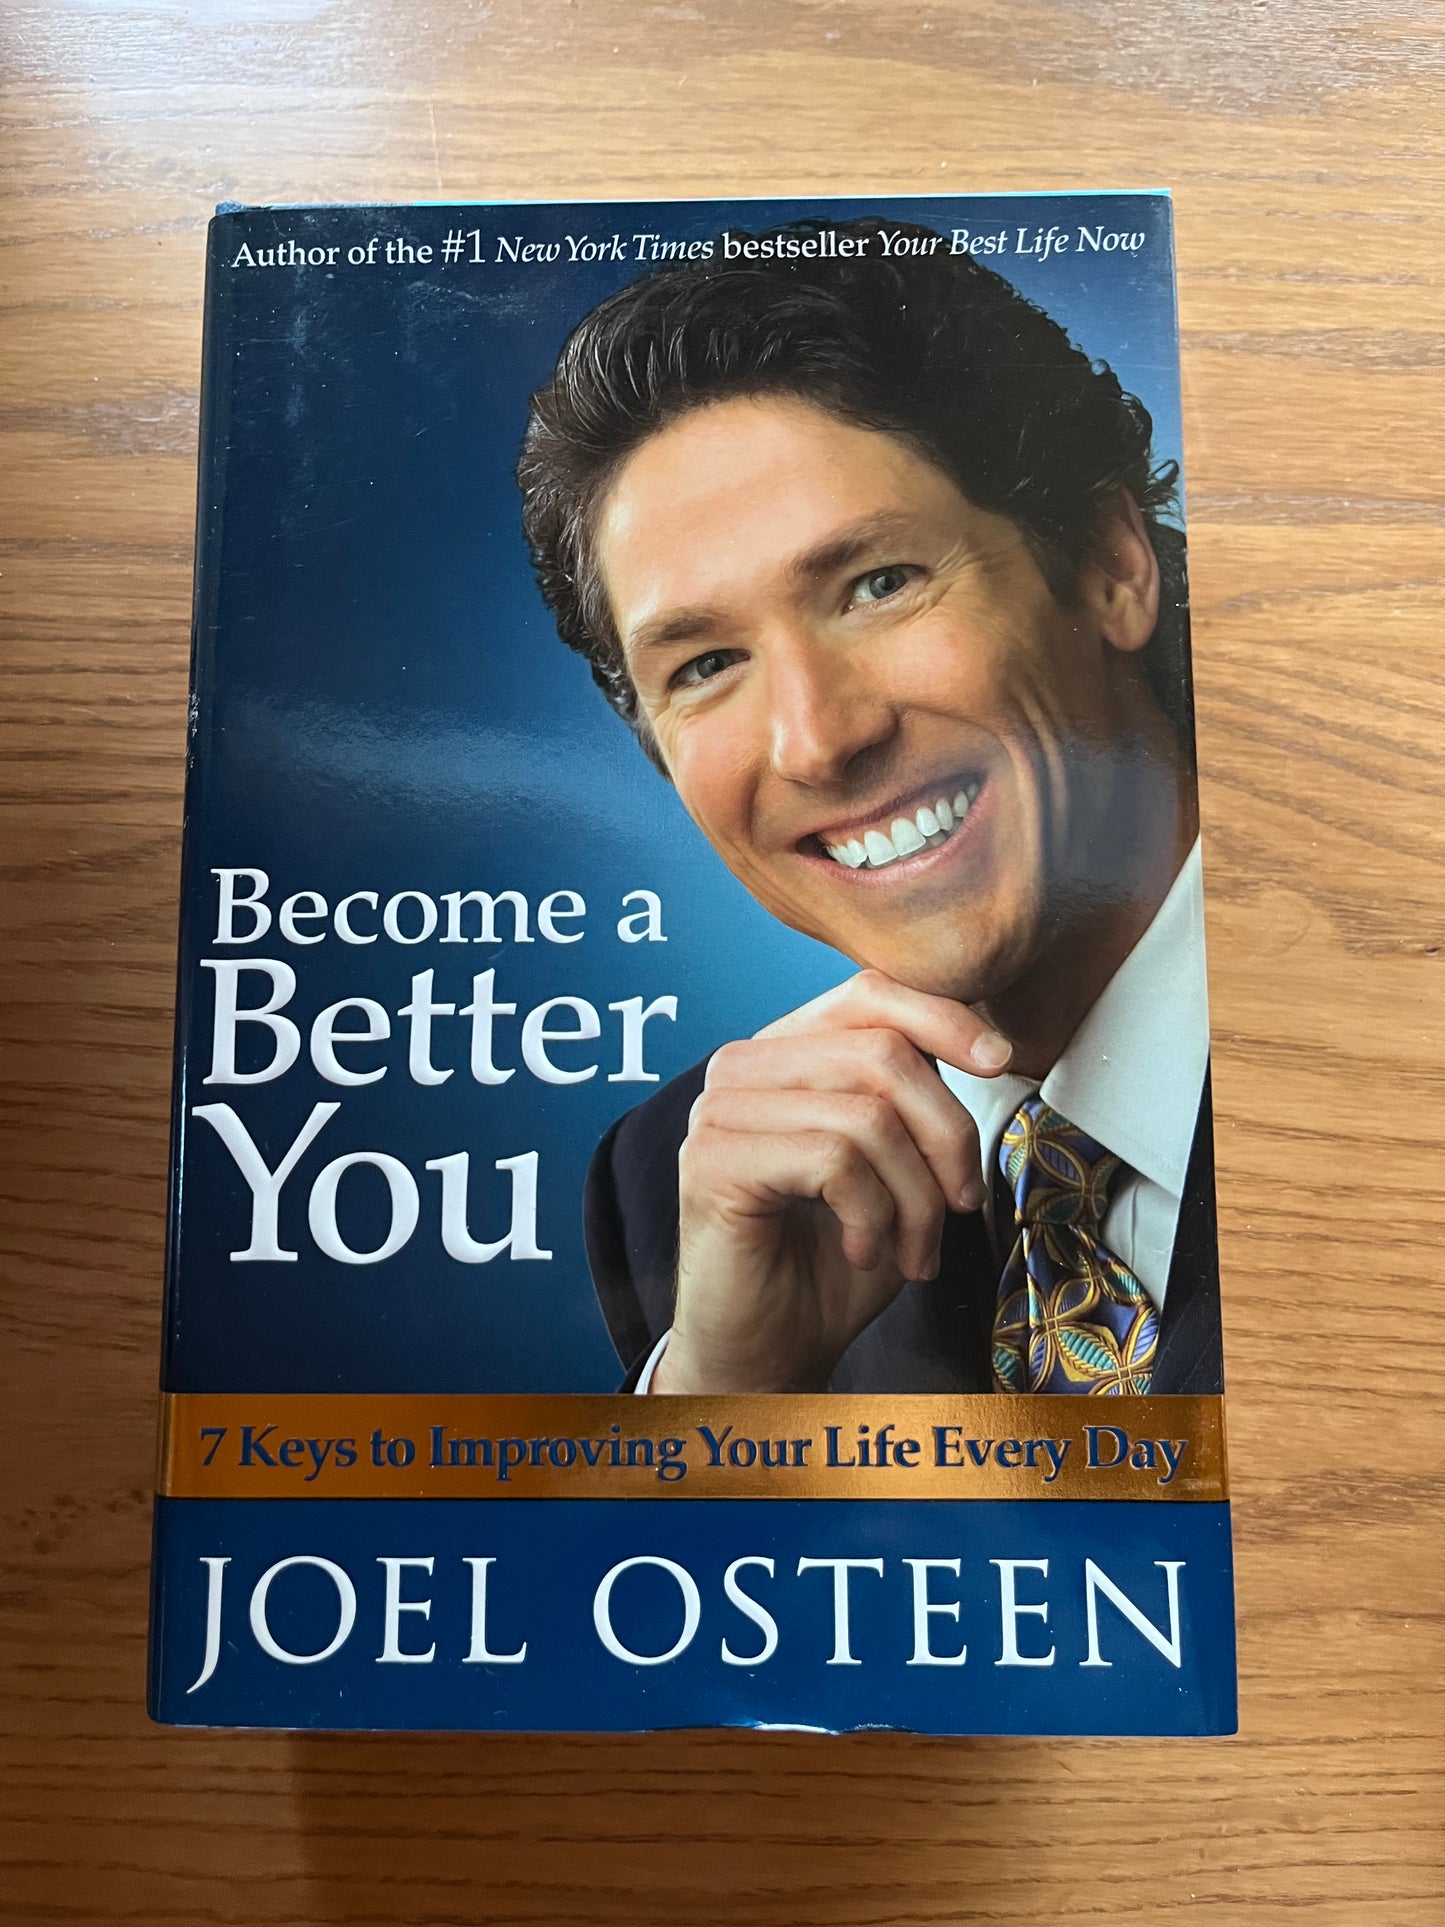 JOEL OSTEEN, Become a Better You (autographed book)